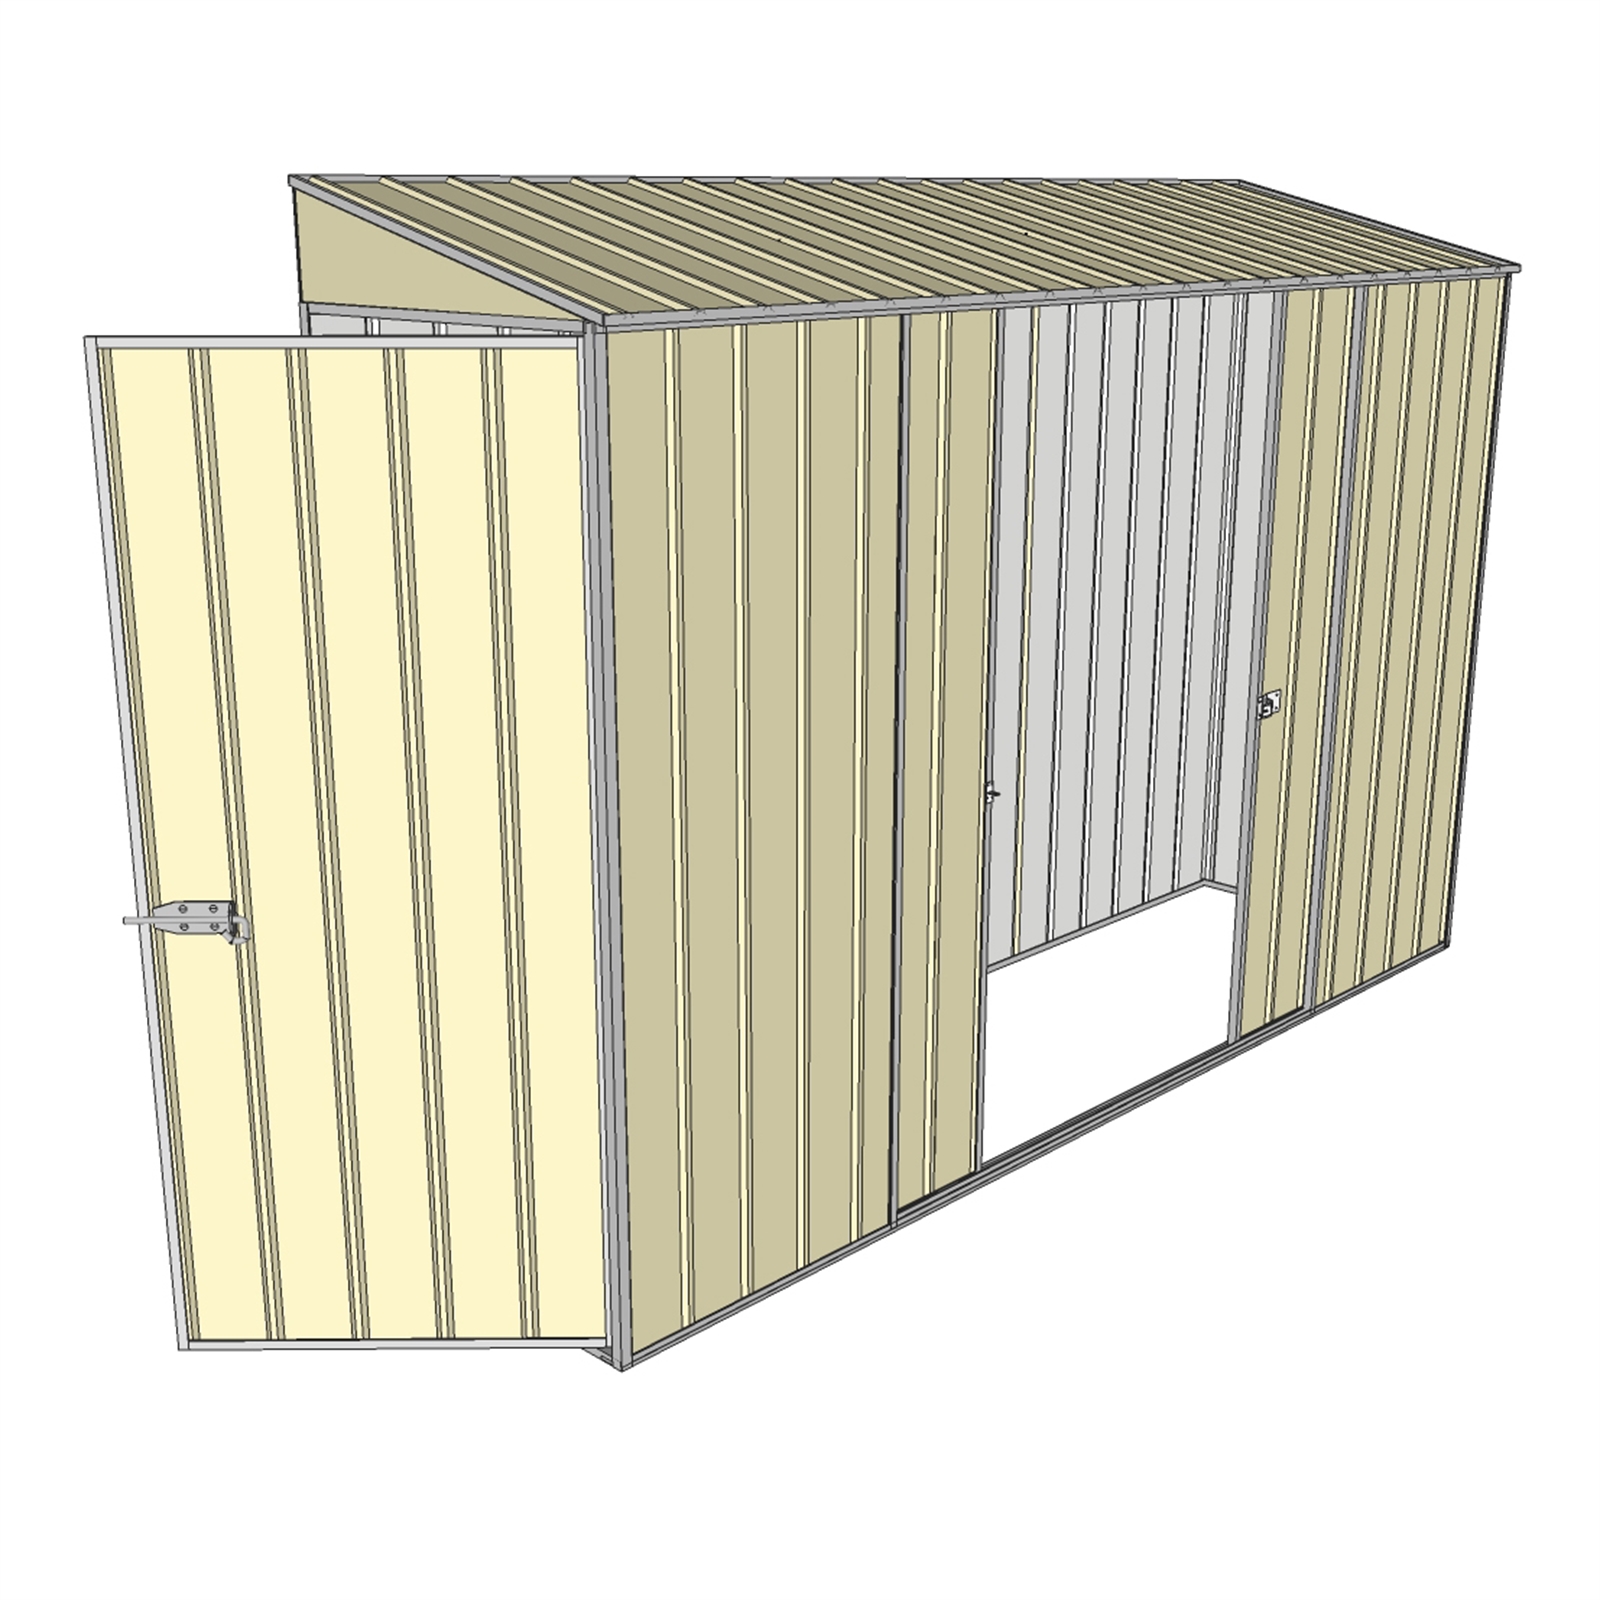 Build-a-Shed 3.0 x 0.8 x 2.0m Cream Double Sliding and Single Hinge Door Narrow Skillion Shed